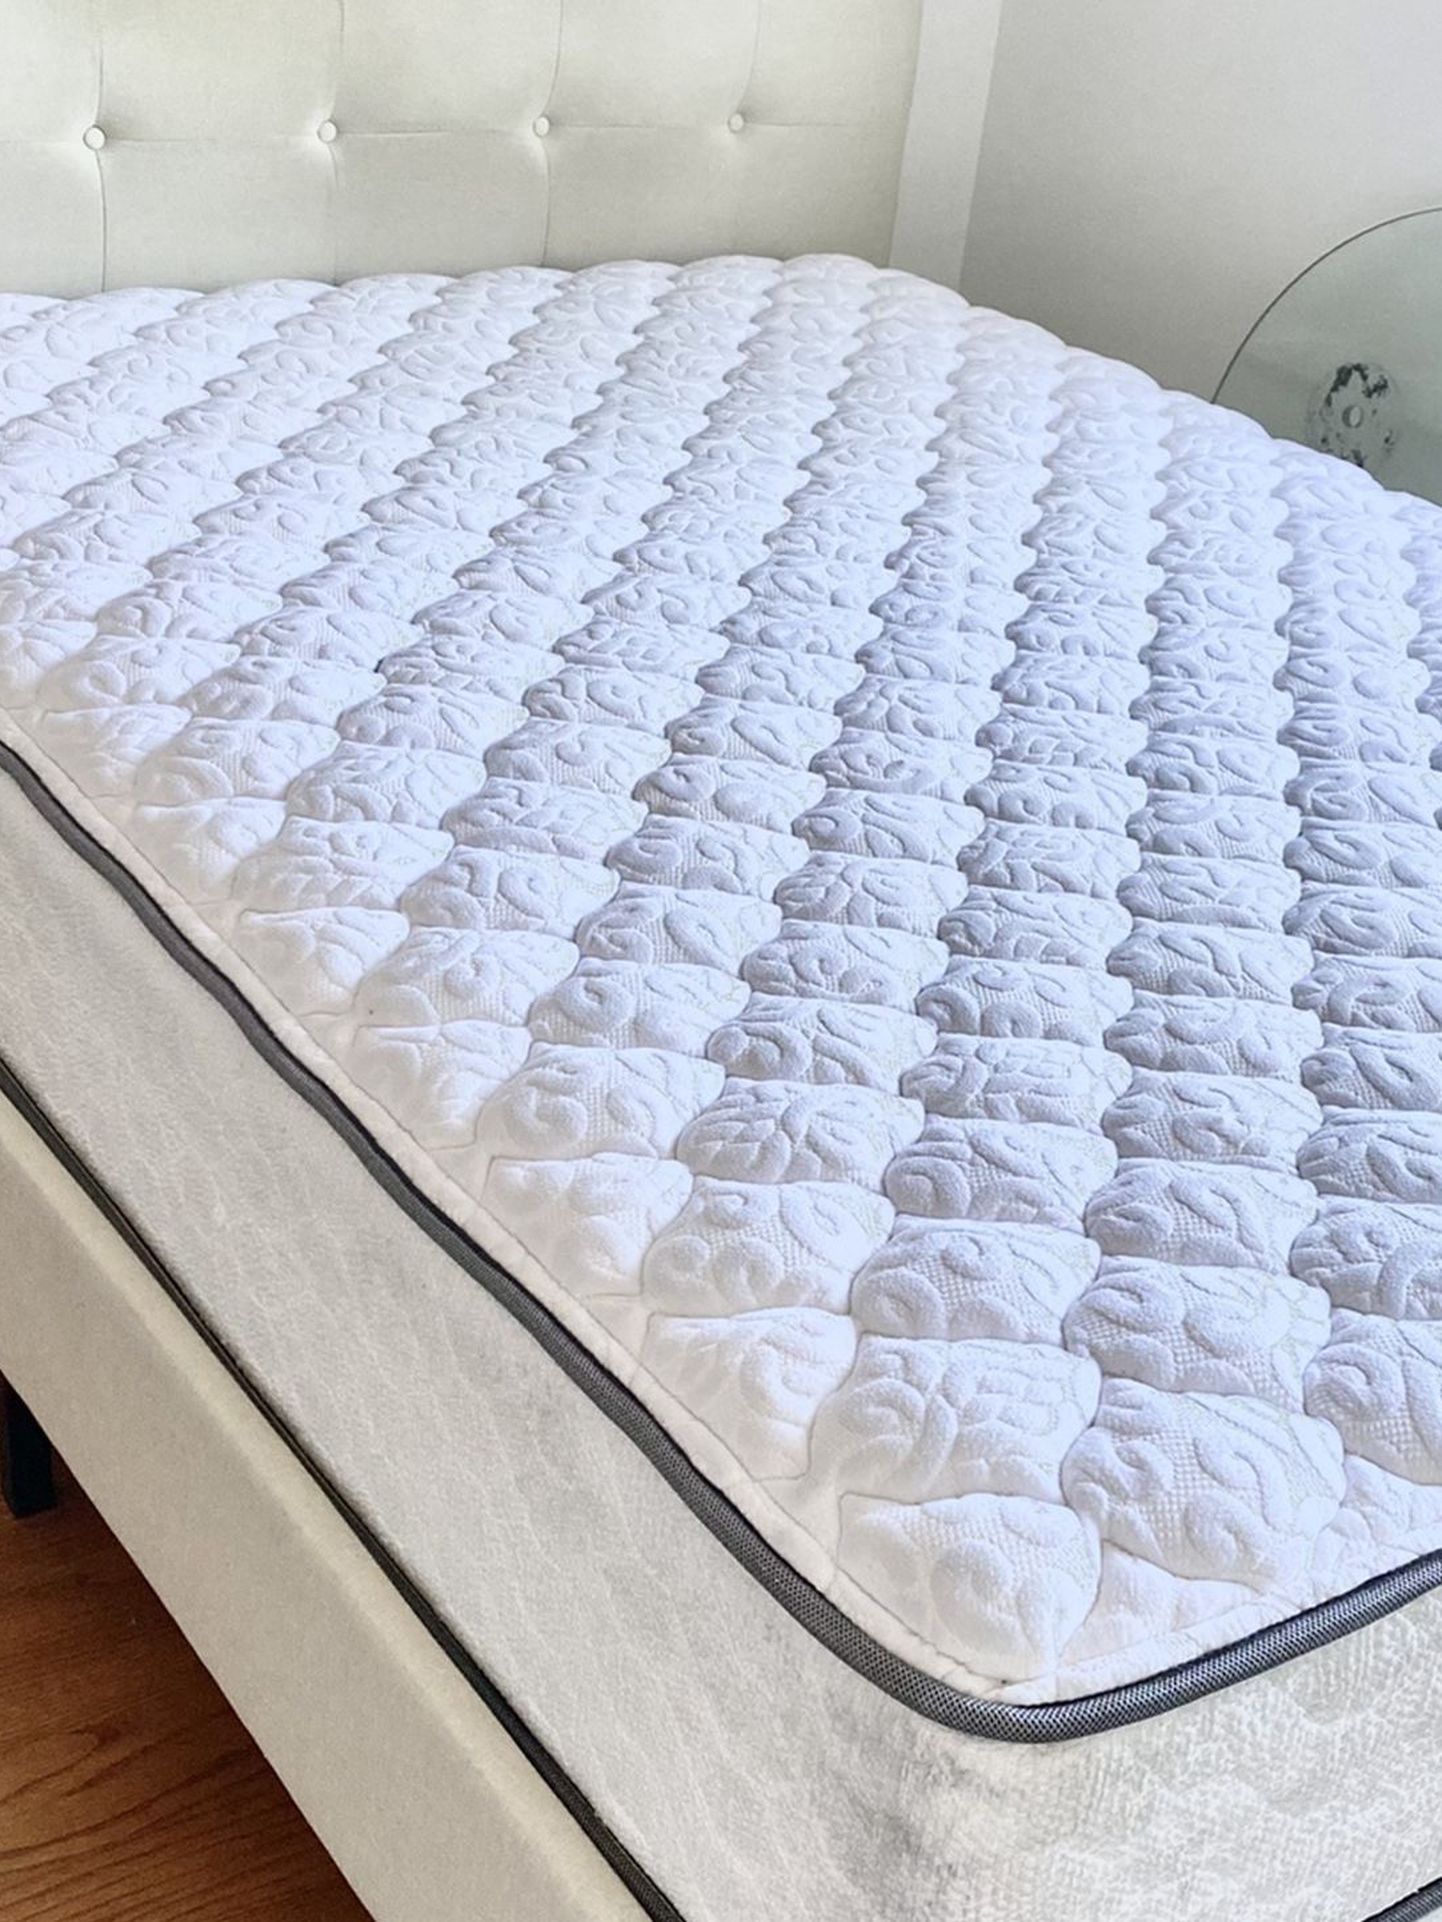 NEW!! REDUCED PRICE!!! Full sized comfy, EXCELLENT condition bed WITH box spring and cream, quilted headboard!